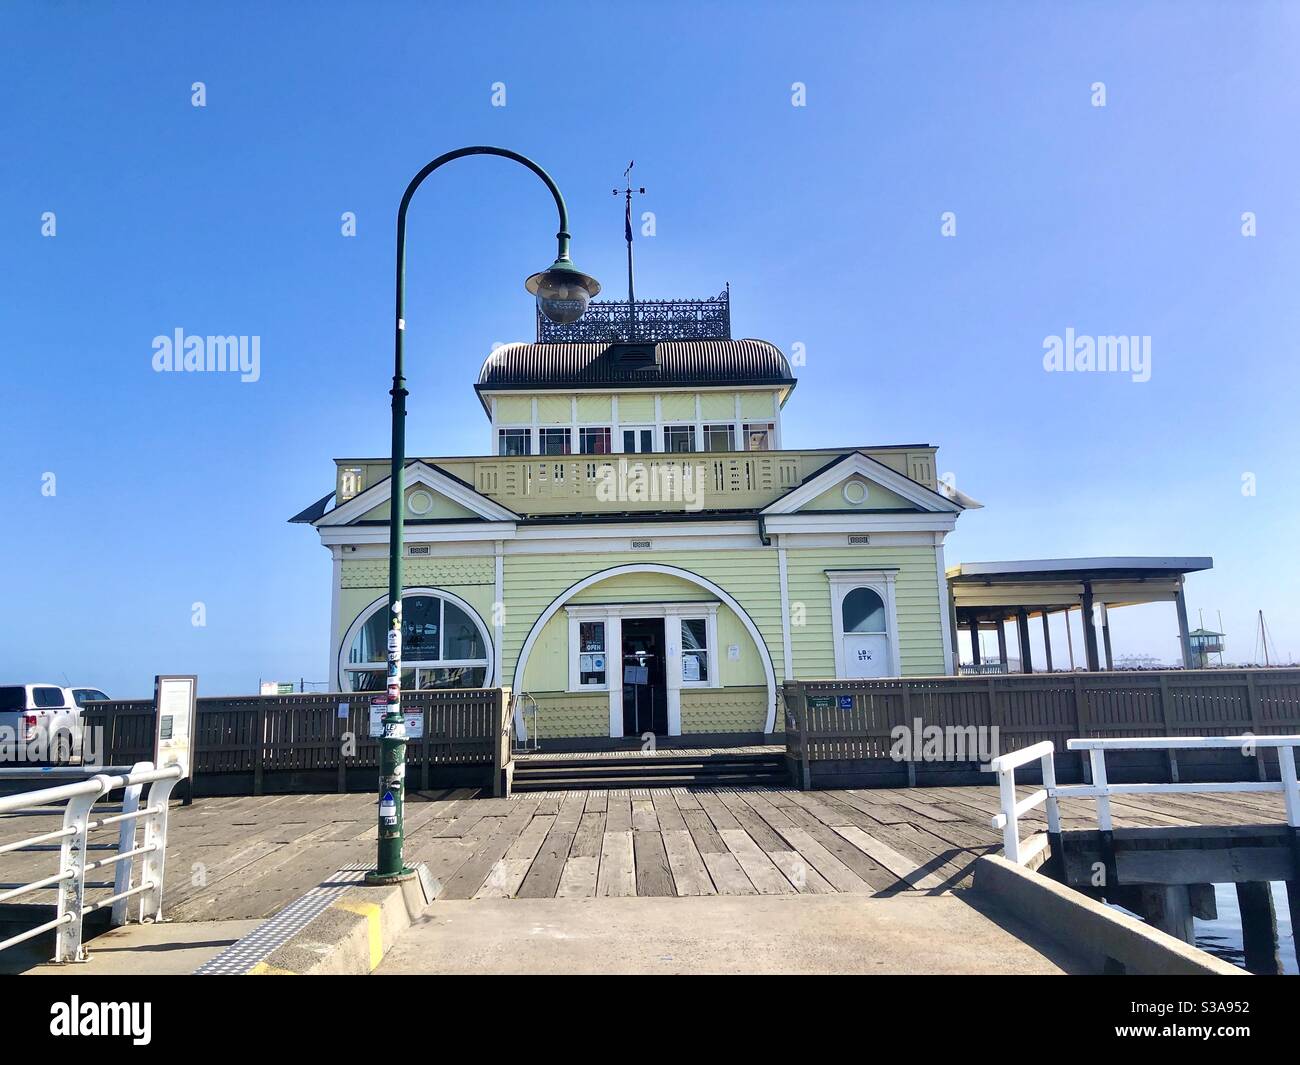 Little Blue Cafe at the end of St Kilda Beach, Melbourne area, Victoria, Australia. The cafe and restaurant dates back to 1859. Stock Photo